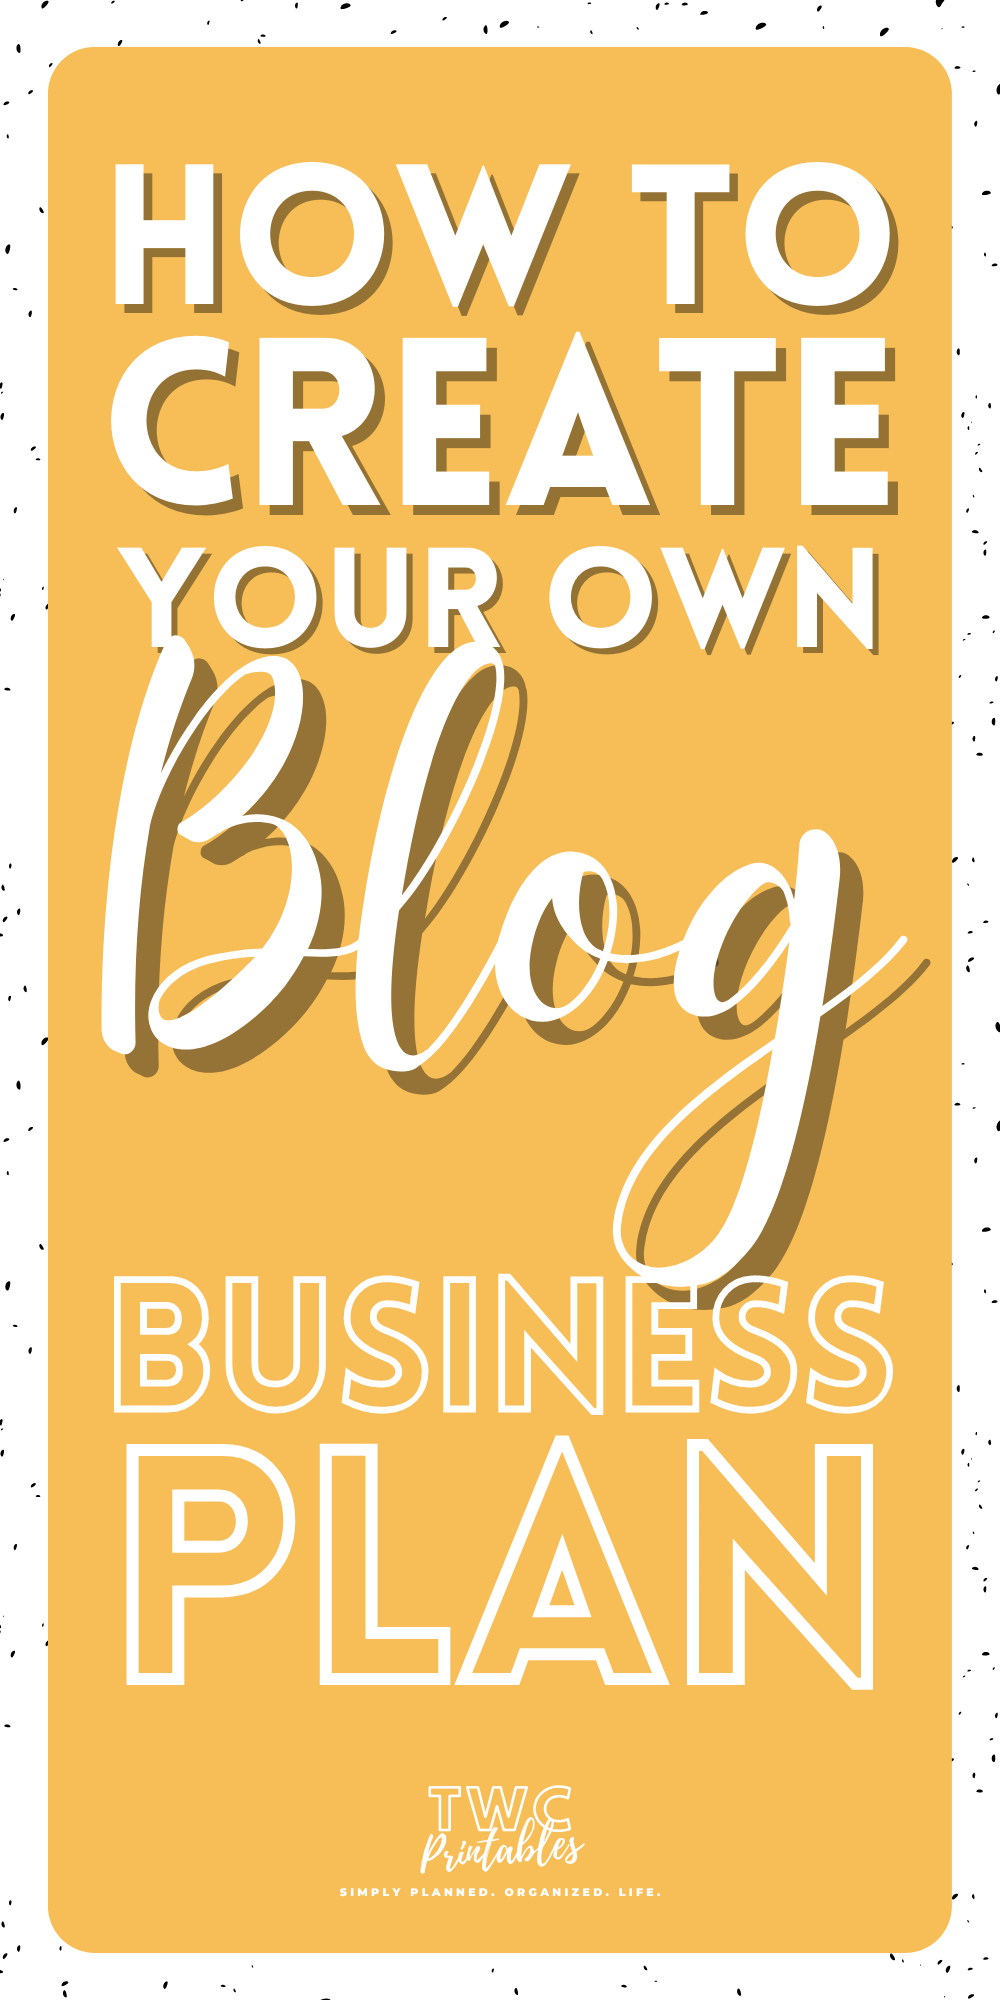 How to create your own blog business plan